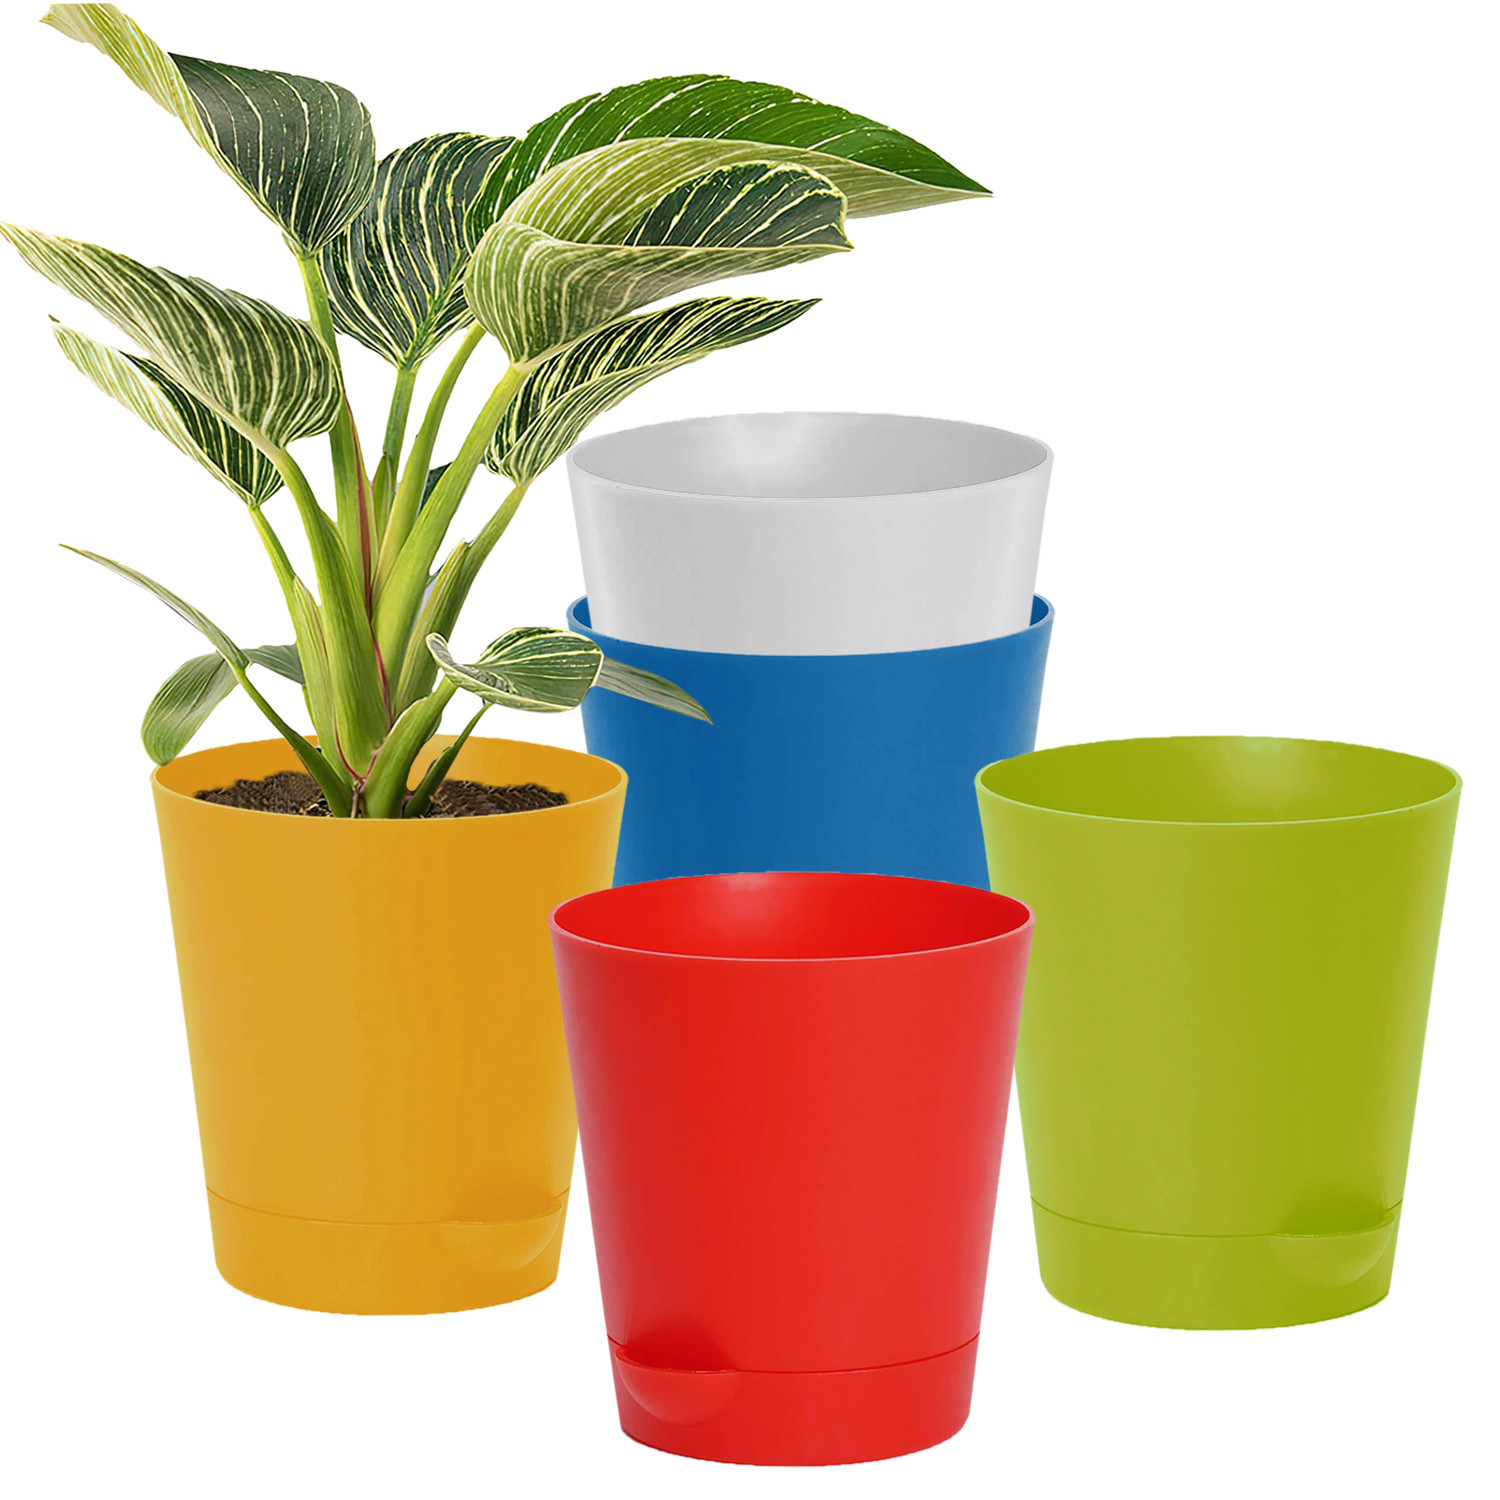 Kuber Industries Plastic Titan Pot|Garden Container For Plants & Flowers|Self-Watering Pot With Drainage Holes,6 Inch,Pack of 5 (Multicolor)